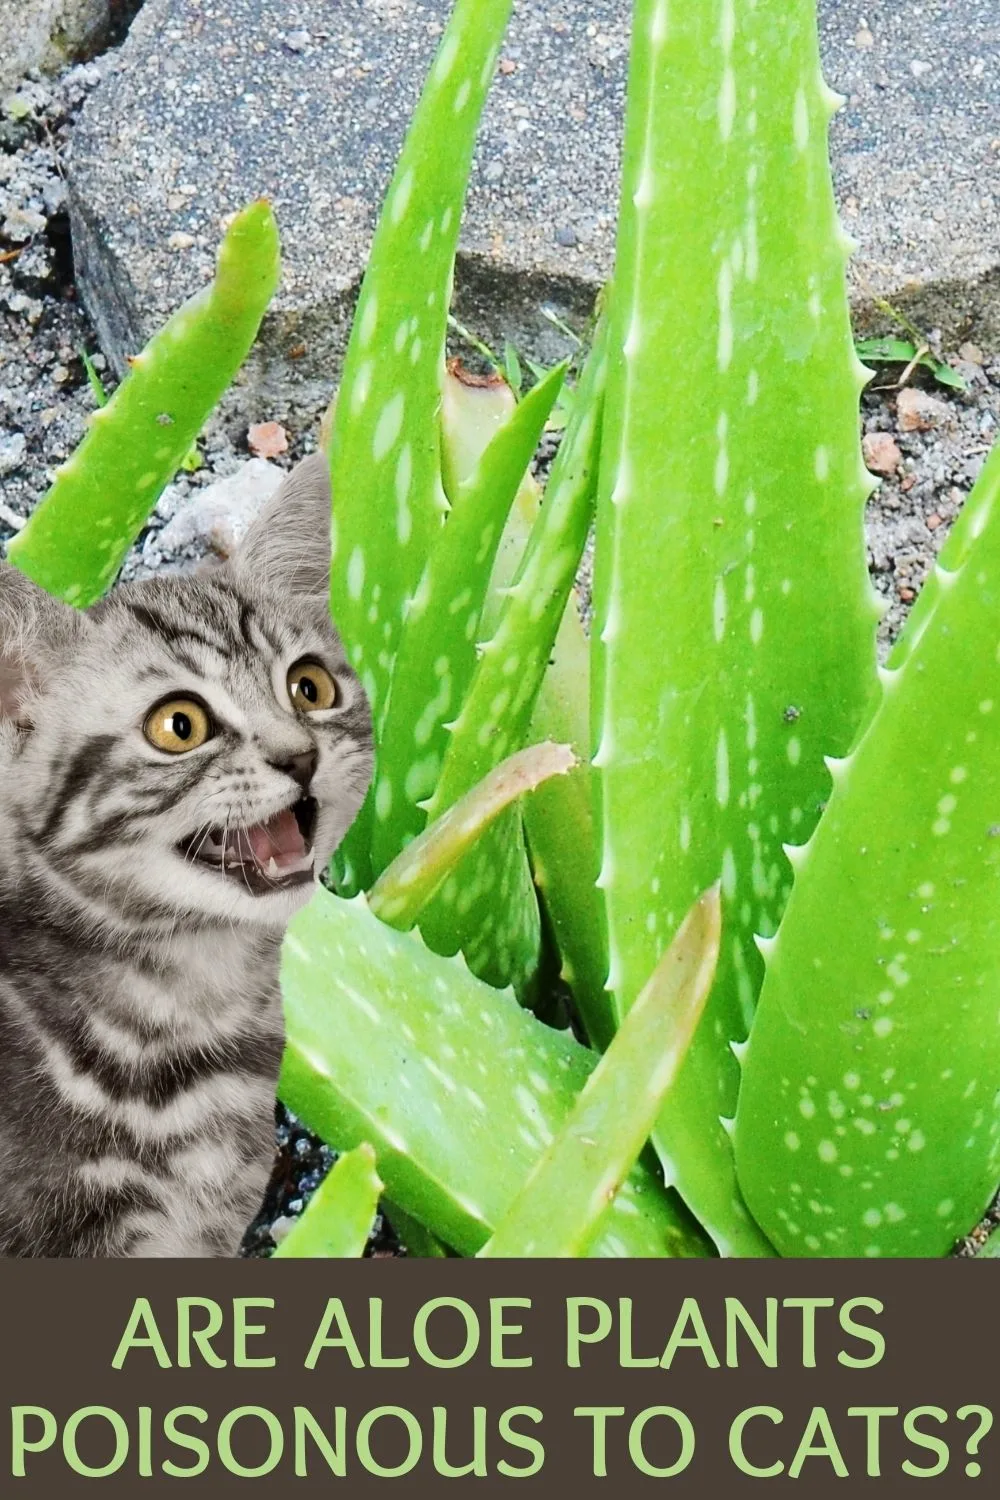 Are aloe plants poisonous to cats